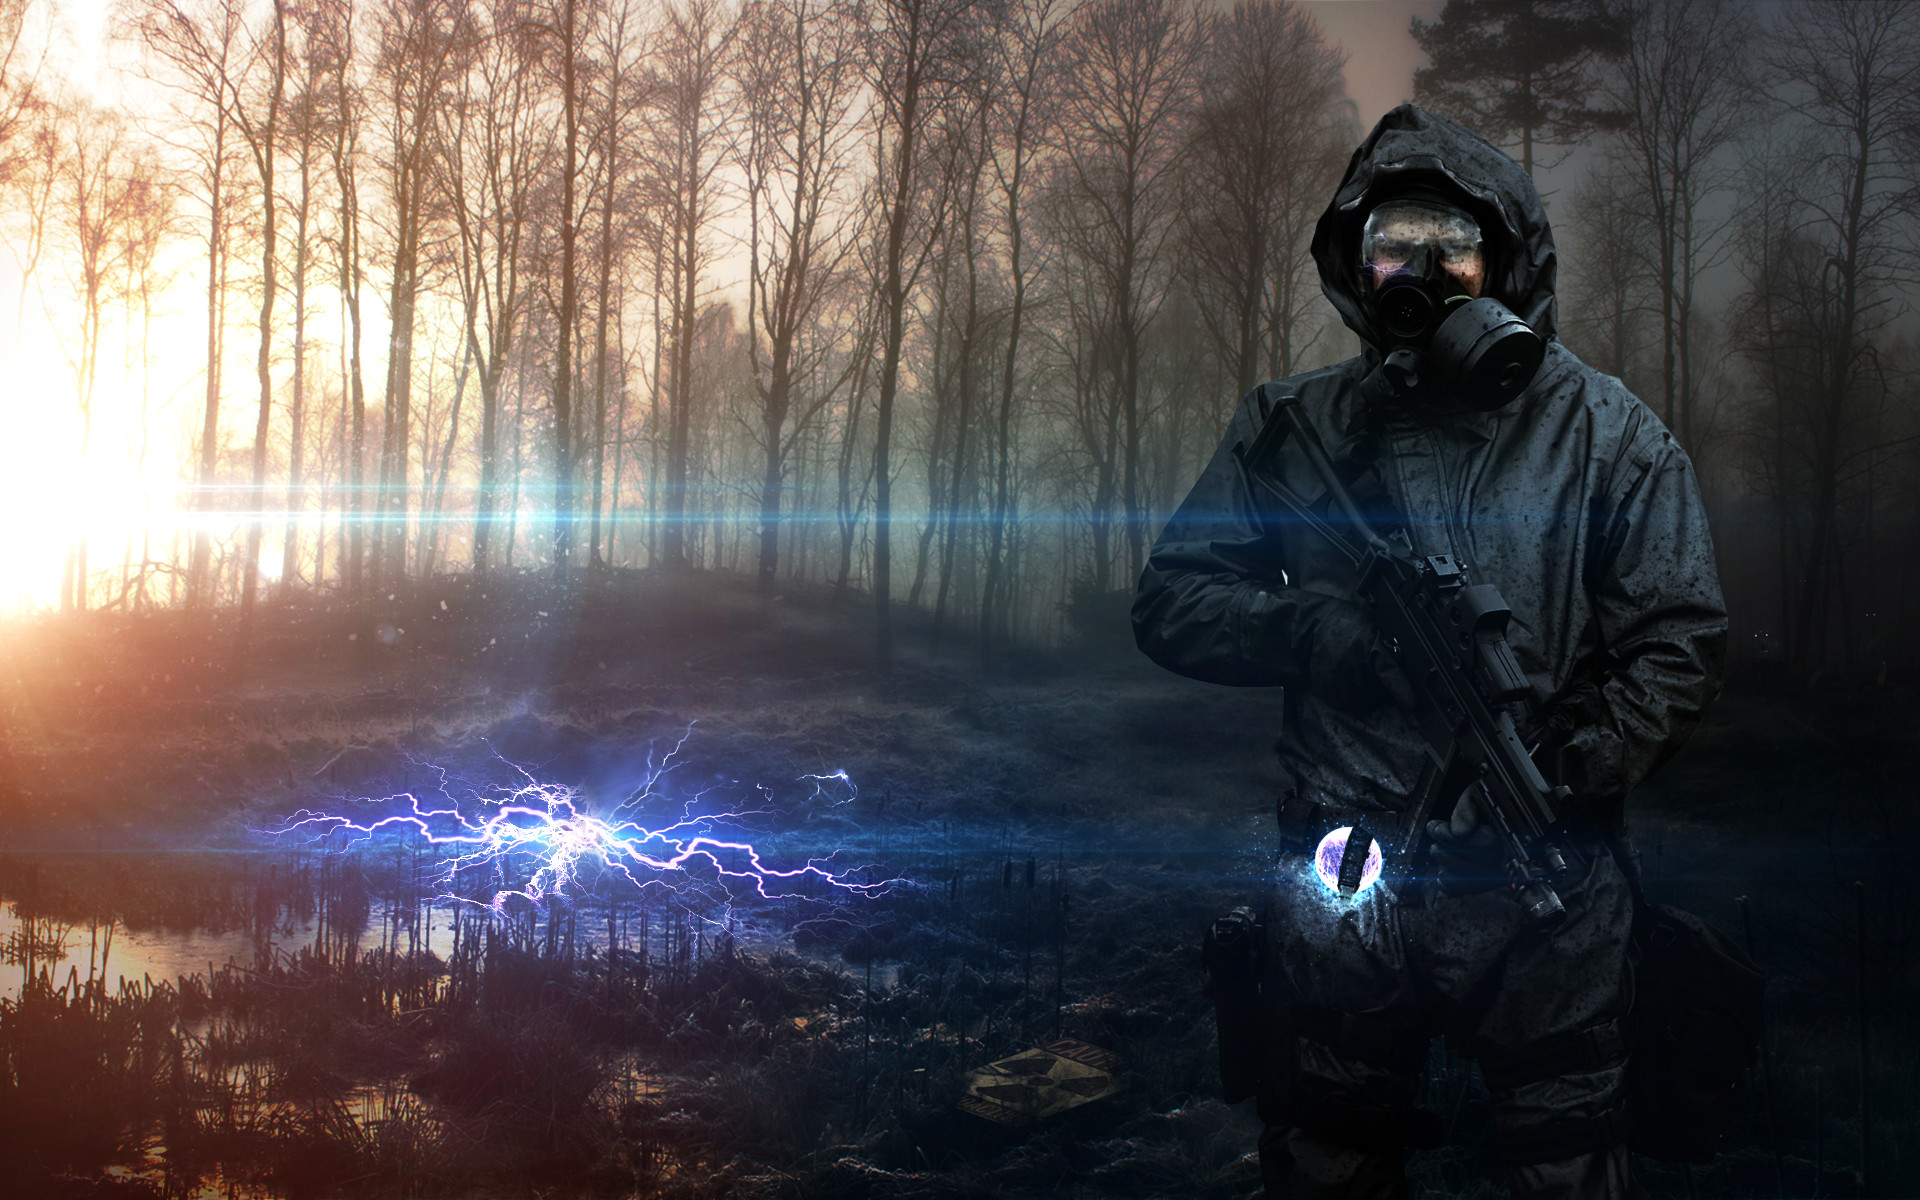 soldier, Vadim Sadovski, S.T.A.L.K.E.R., S.T.A.L.K.E.R.: Shadow of Chernobyl, S.T.A.L.K.E.R.: Call of Pripyat, Gamer, Weapon, Apocalyptic, Forest Wallpaper